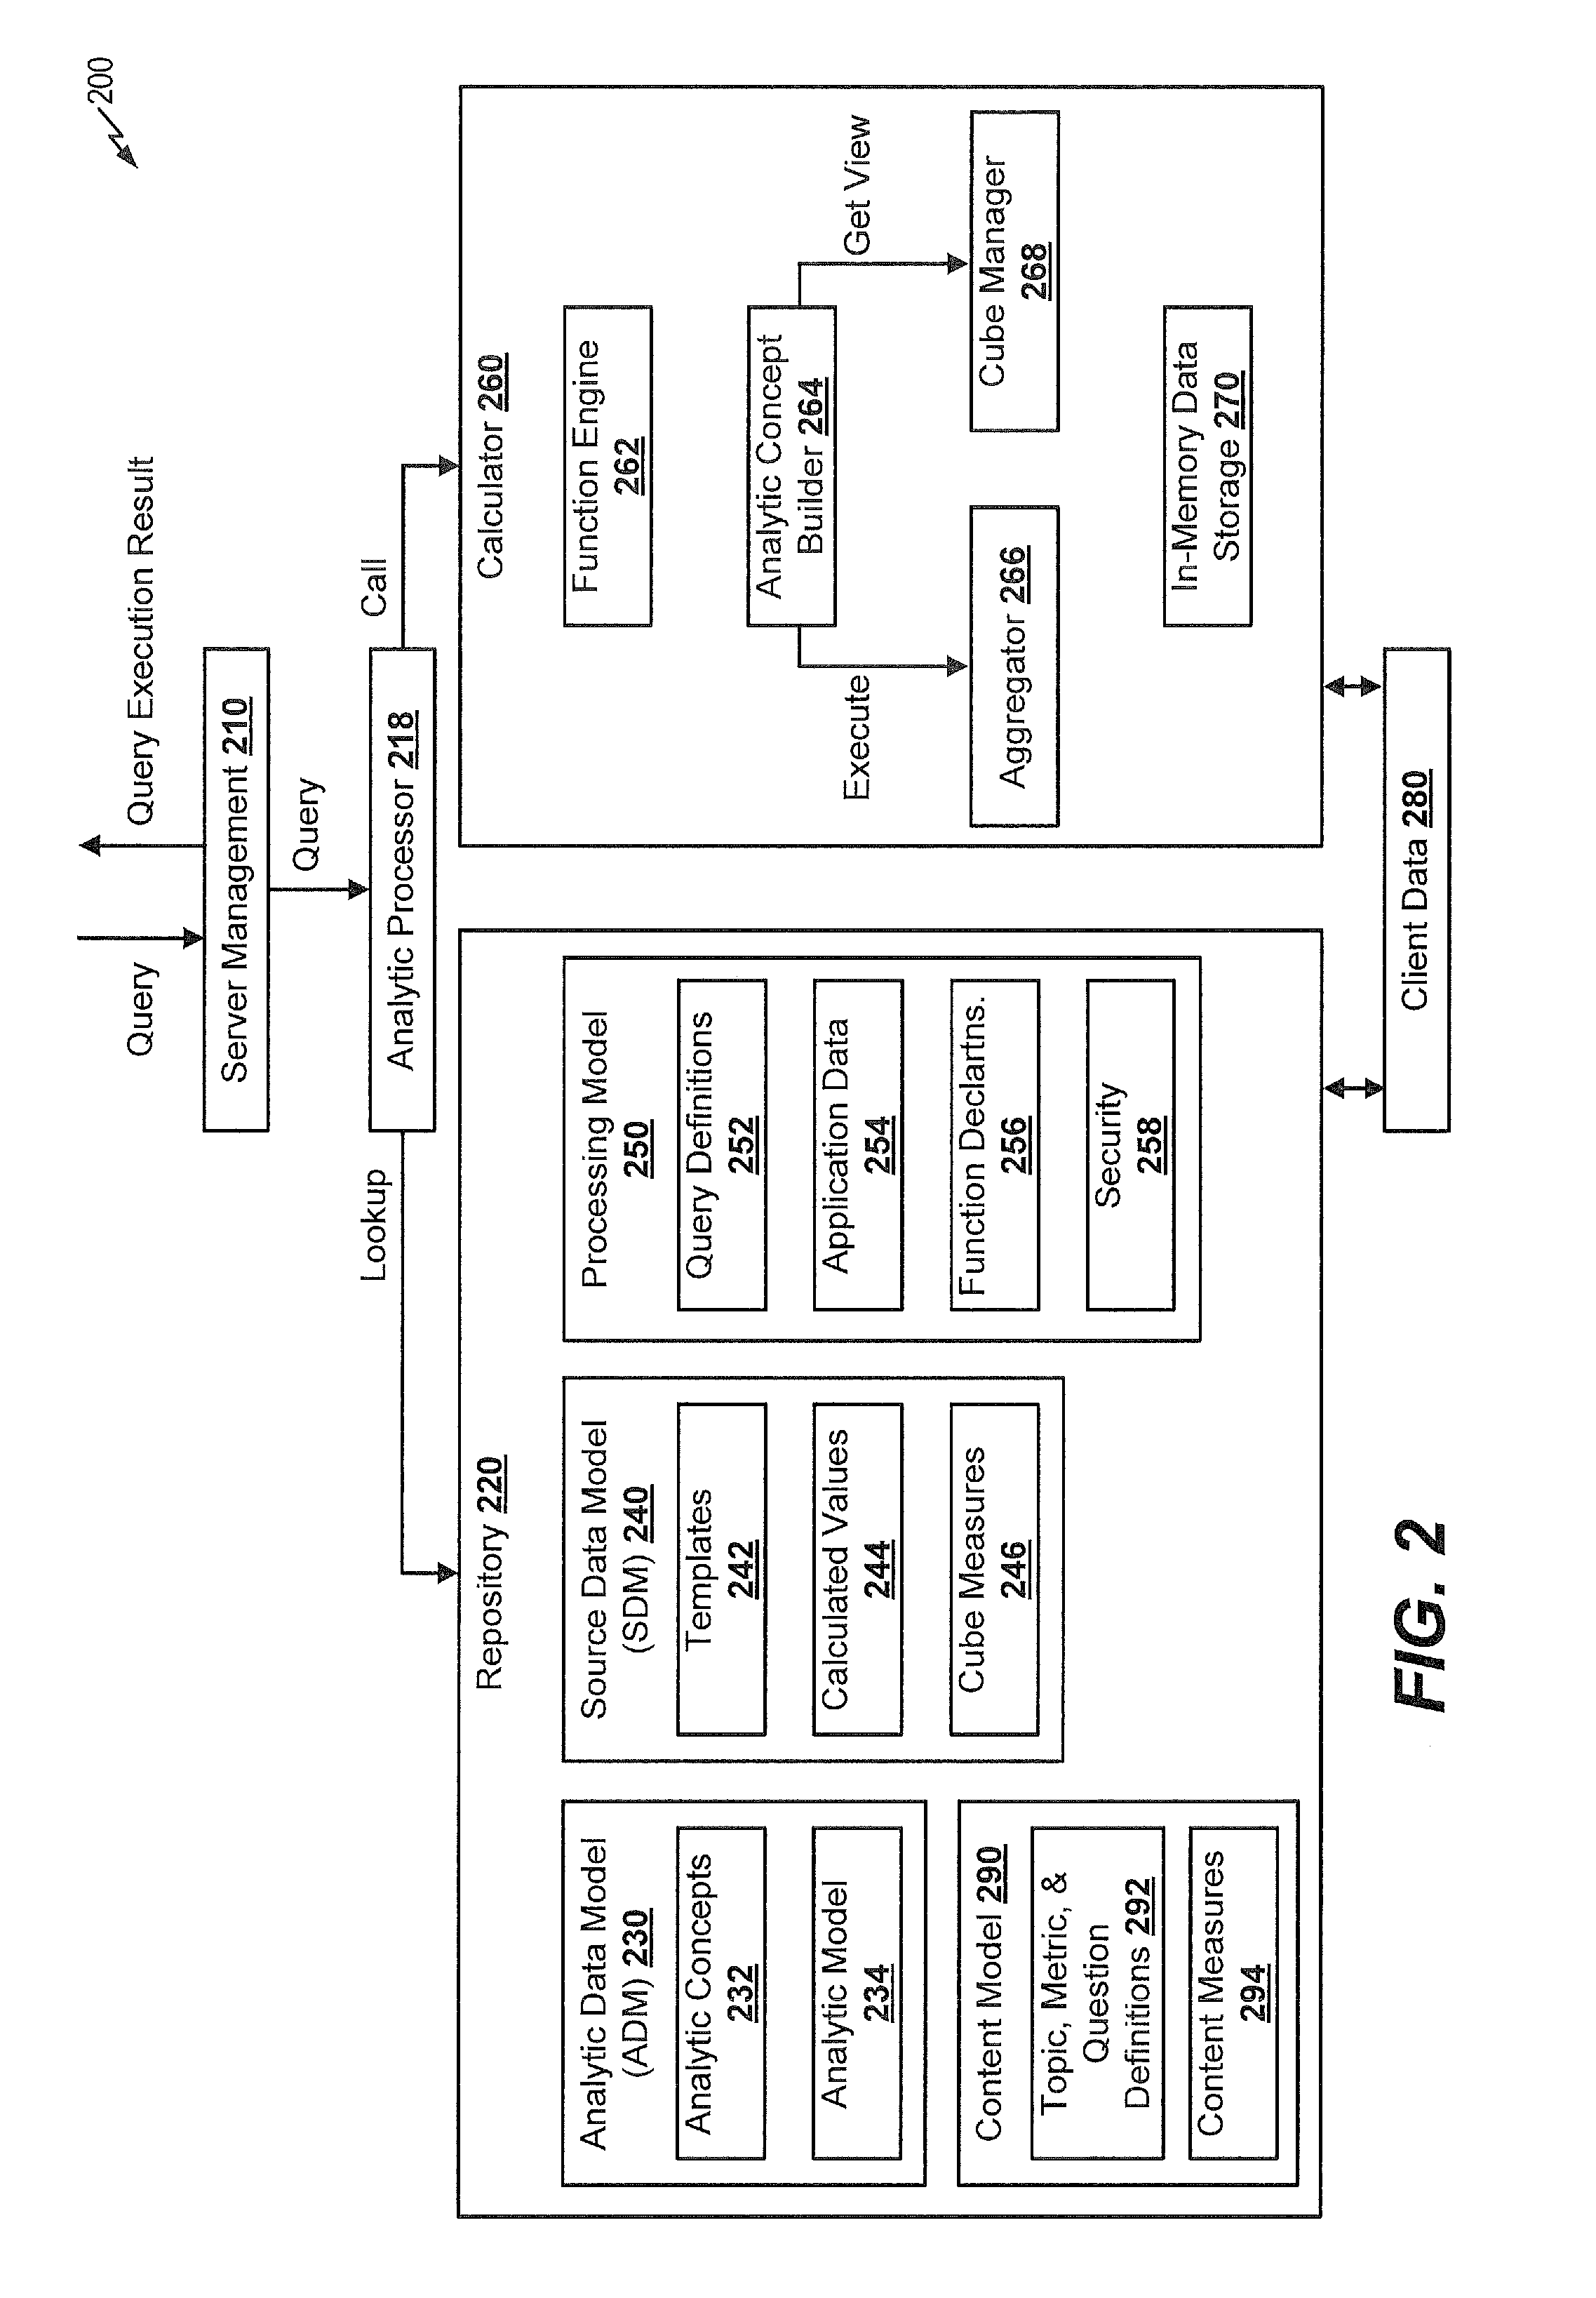 Systems and methods of mapping multidimensional data and executing queries